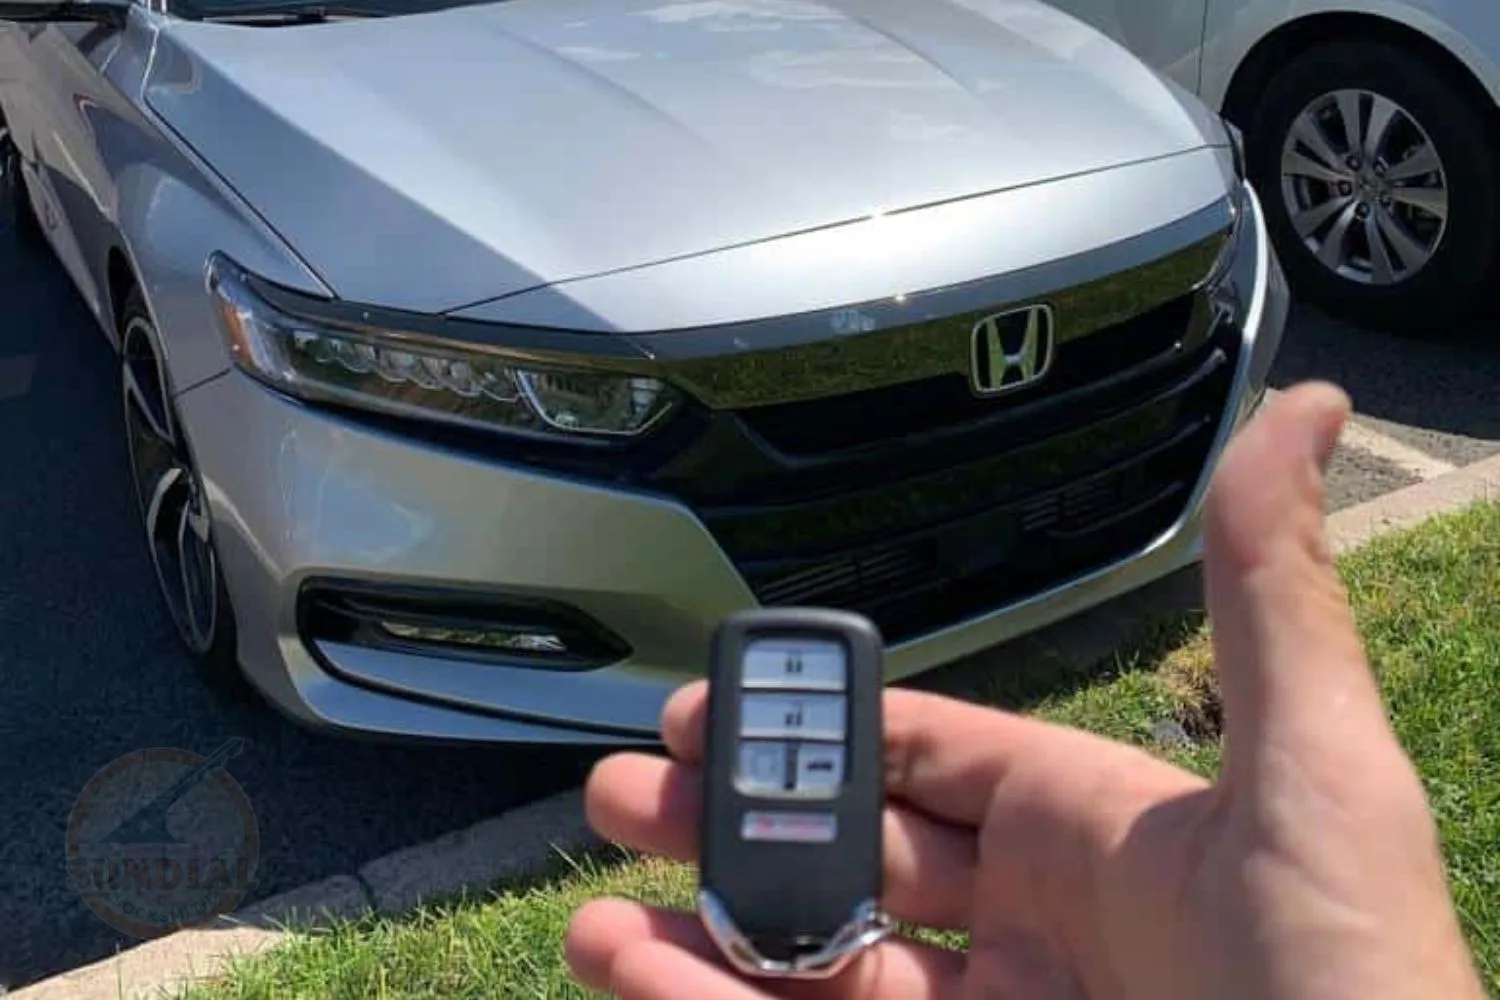 A focused view of a Honda key fob held up with a silver Honda car blurred in the background.